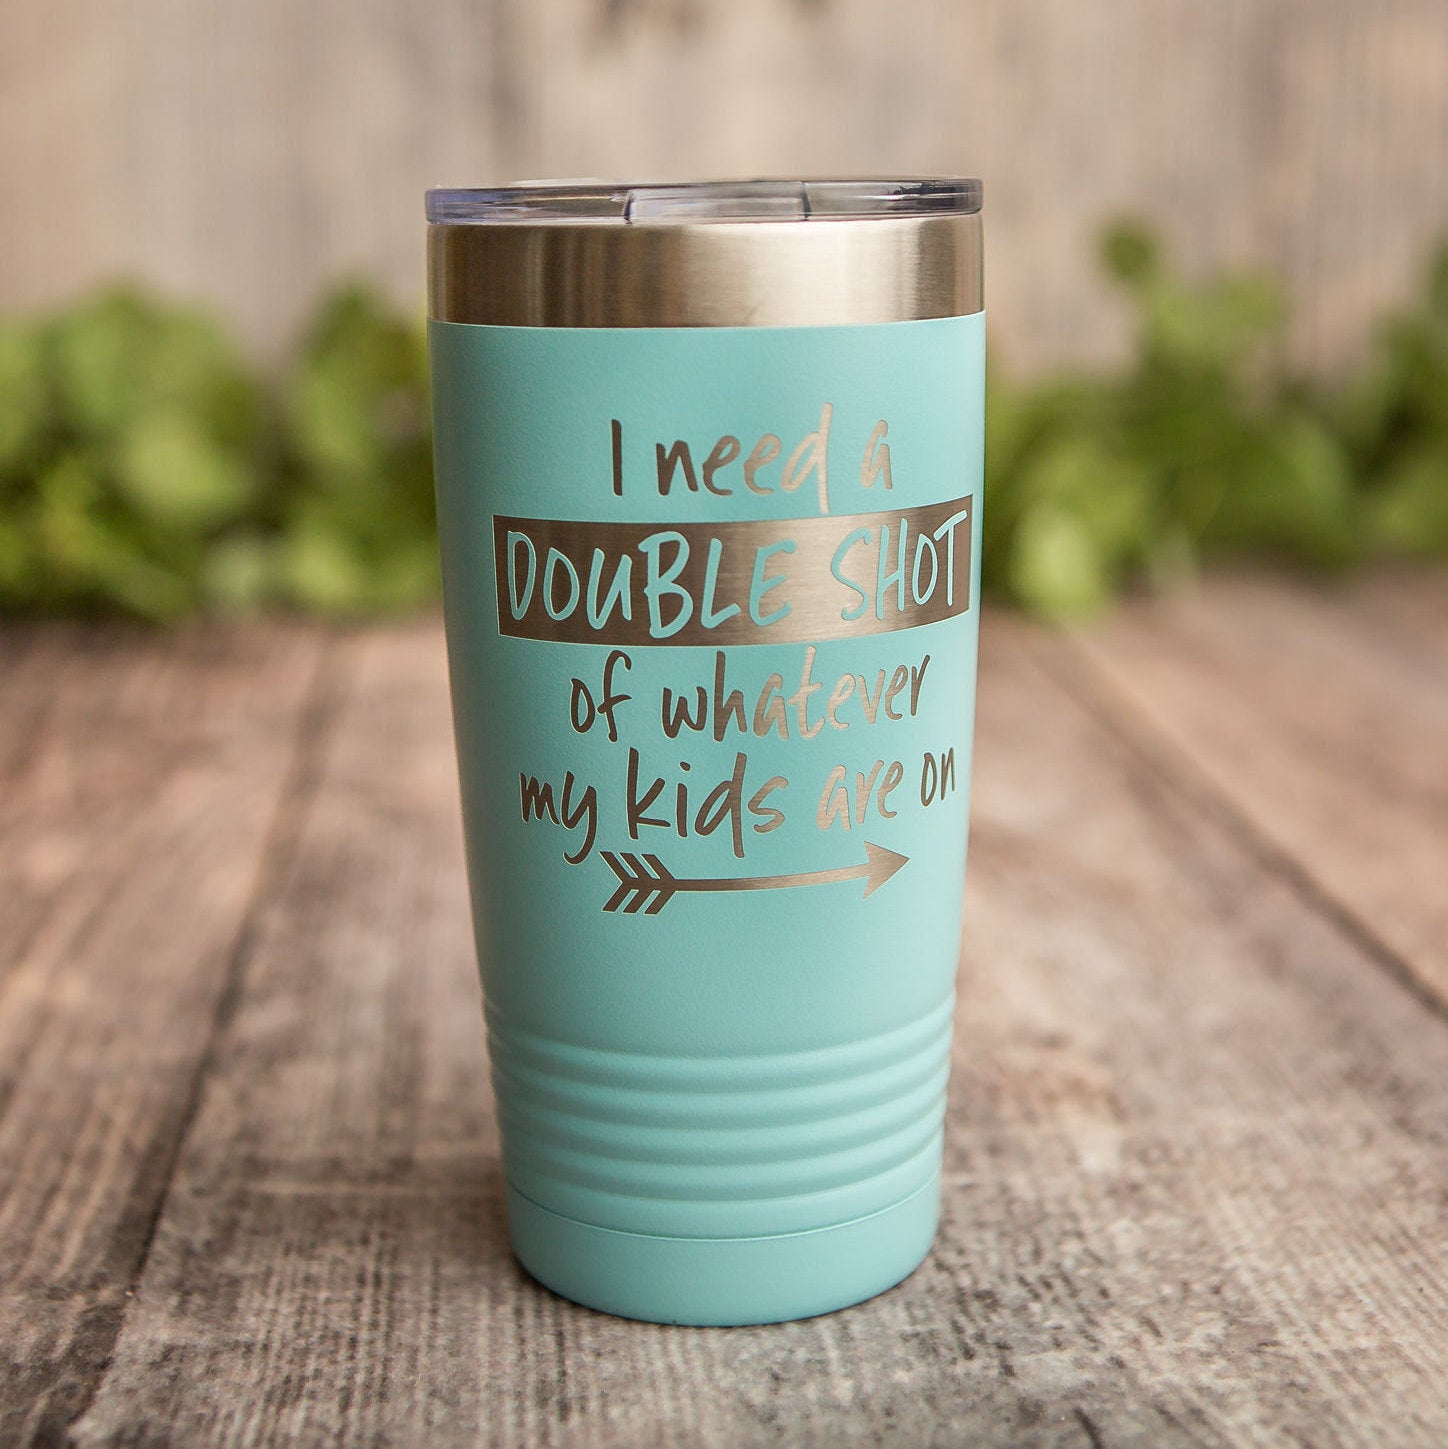 https://3cetching.com/wp-content/uploads/2020/09/i-need-a-double-shot-engraved-stainless-steel-tumbler-twin-mom-mug-triplet-gift-cup-5f5fa9b6.jpg